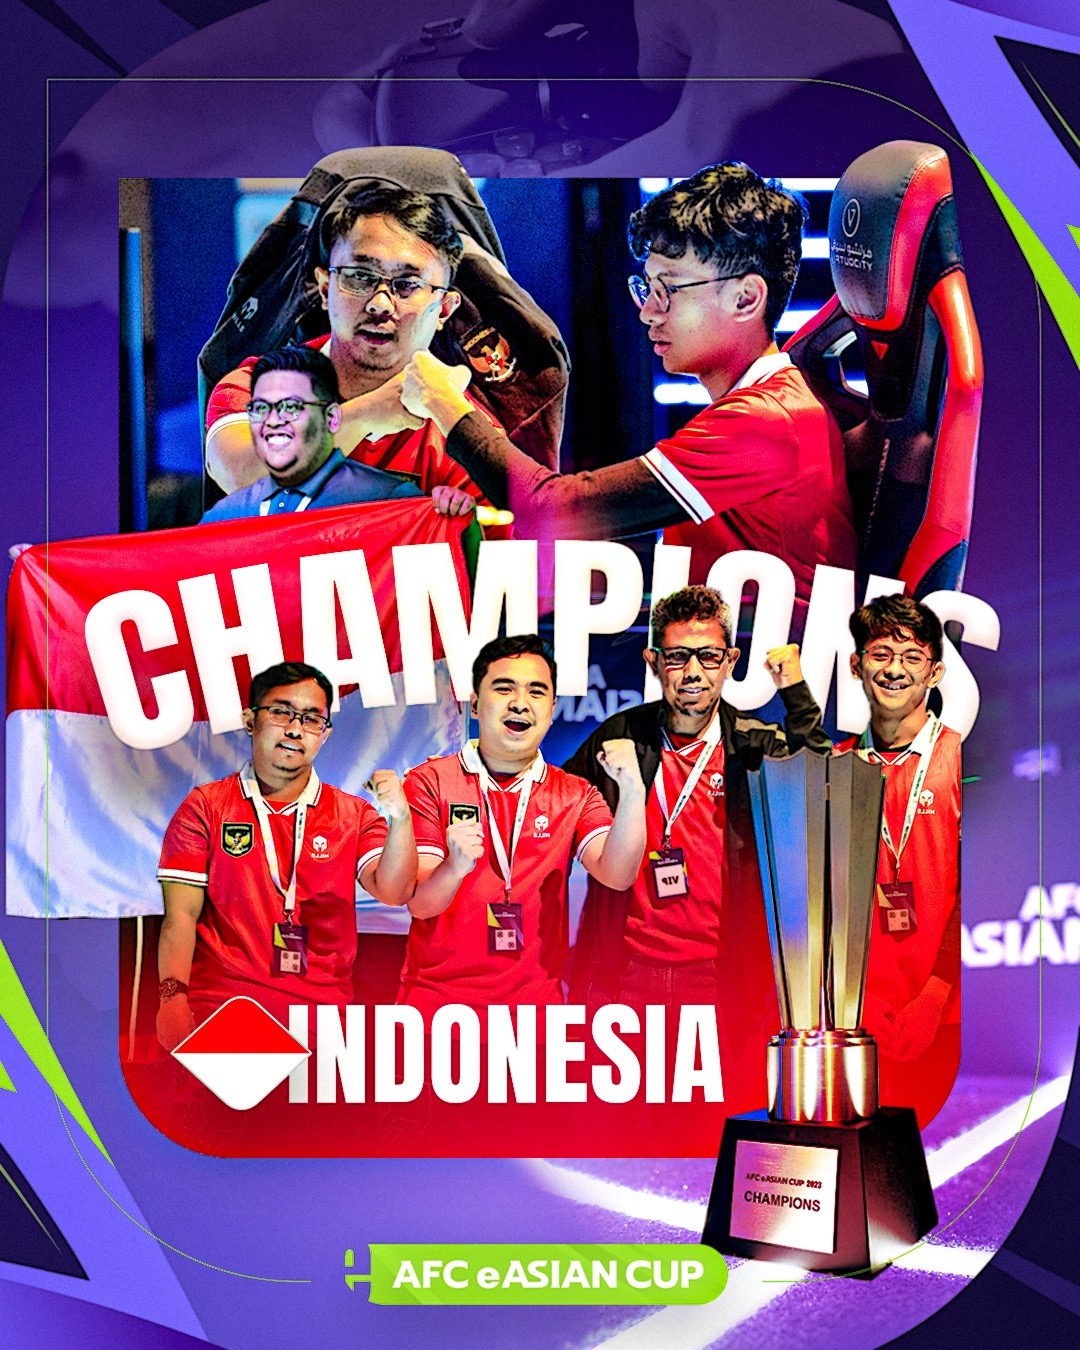 efootball indonesia vo dich easian cup